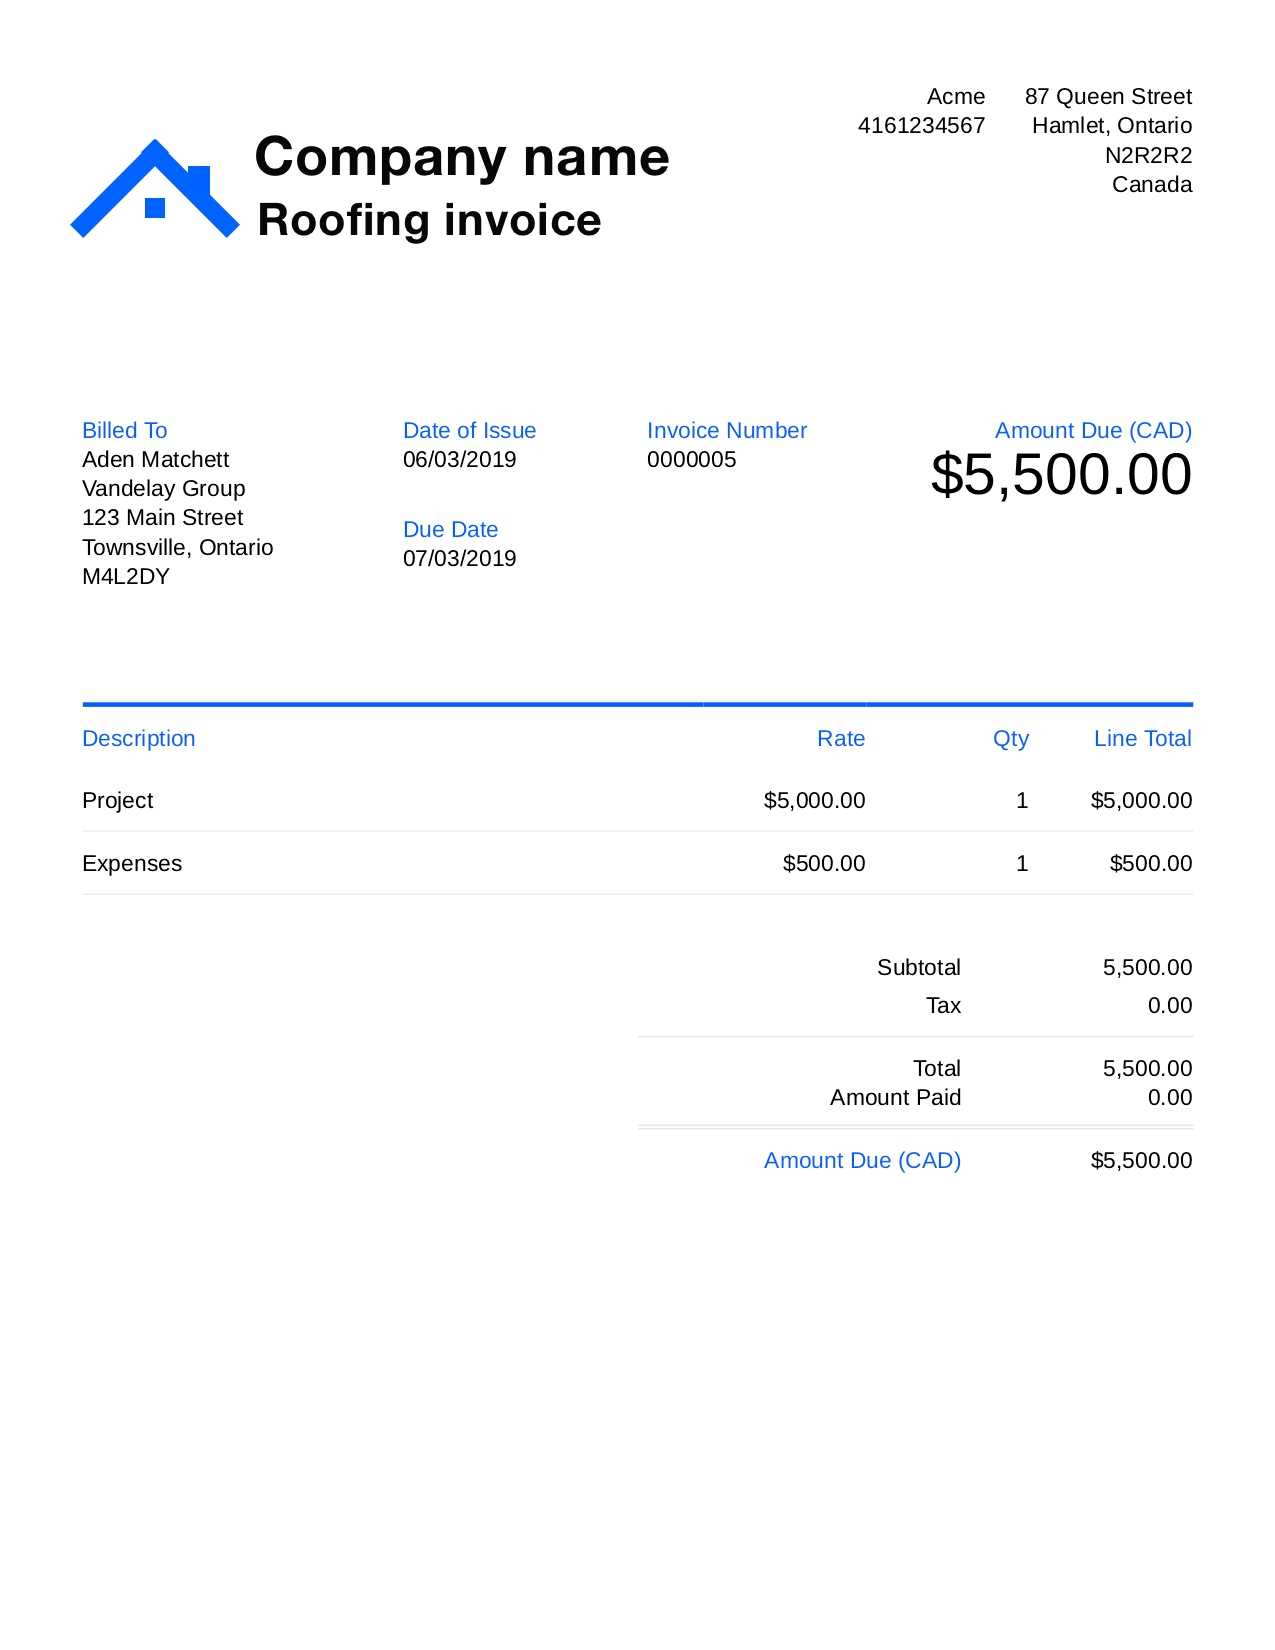 Free Roofing Invoice Template. Customize And Send In 90 Seconds With Free Roofing Invoice Template